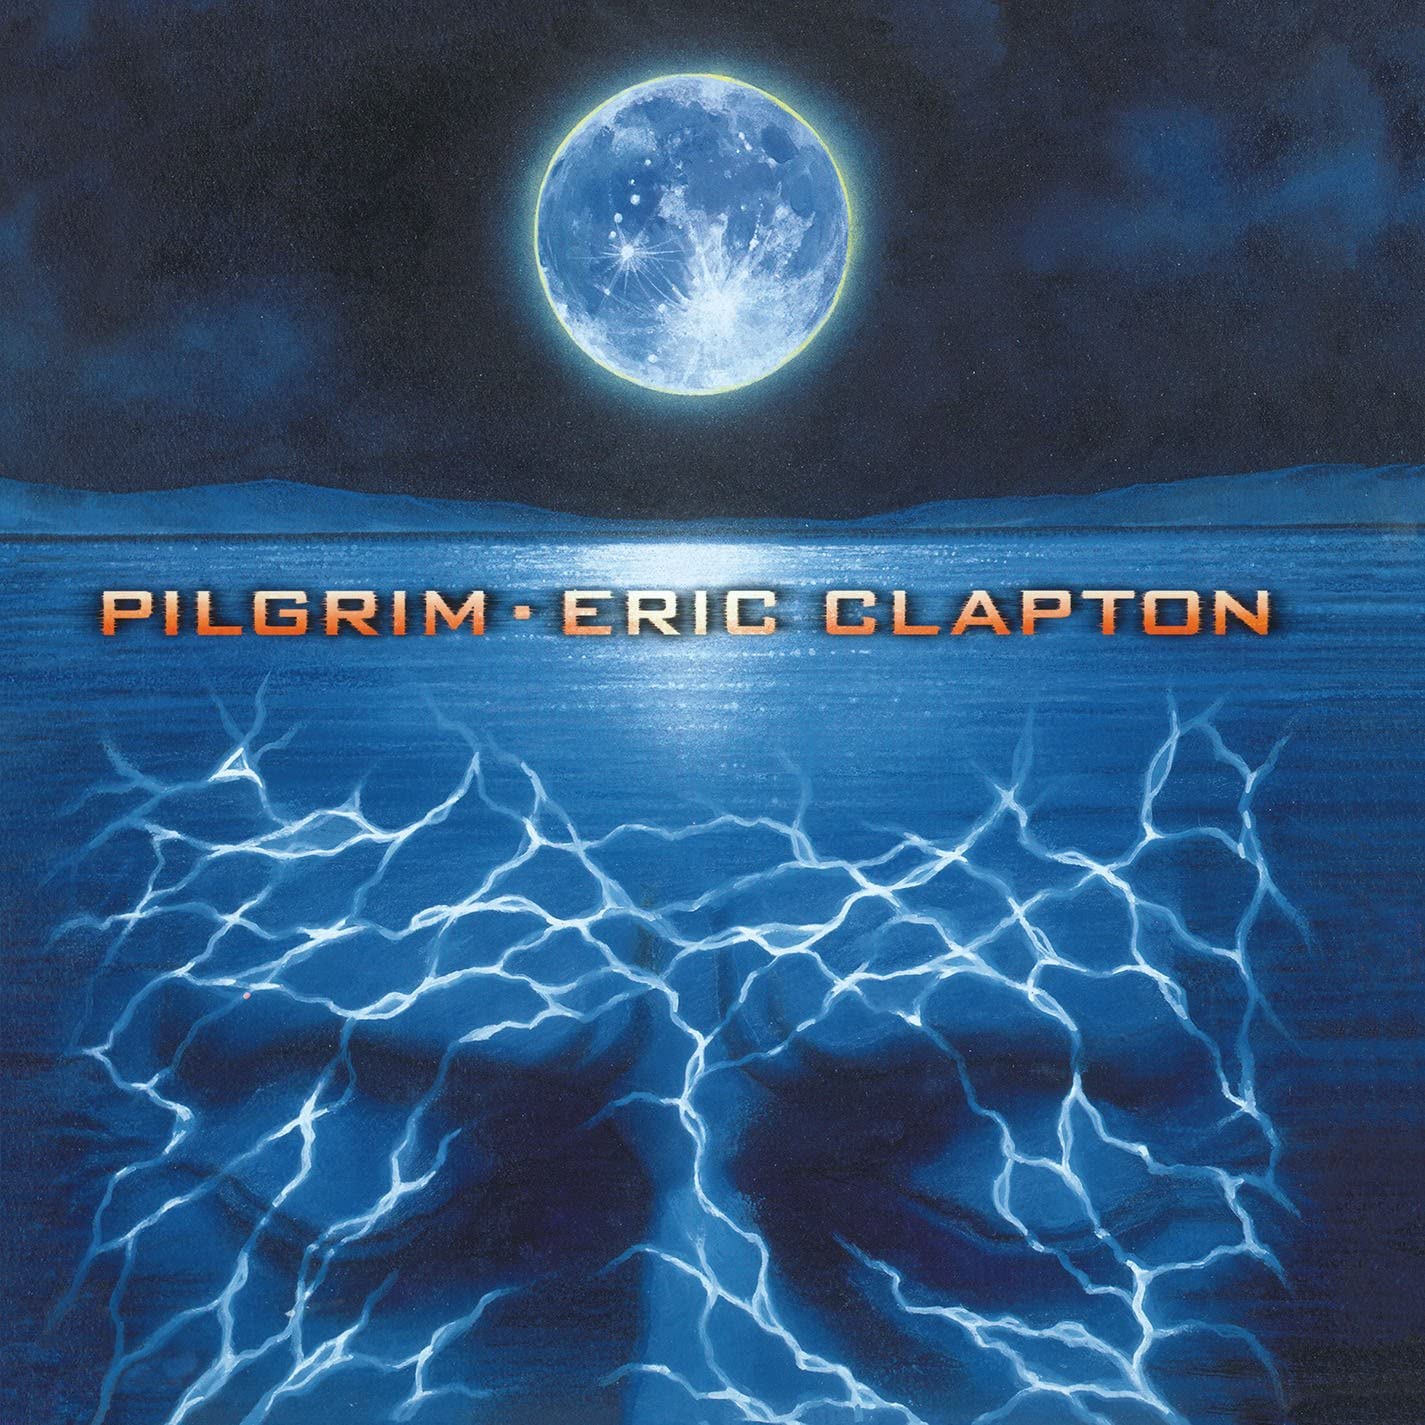 Pilgrim, the 13th studio album from Eric Clapton was released in 1998. This has been re-released as a 2 disc vinyl.